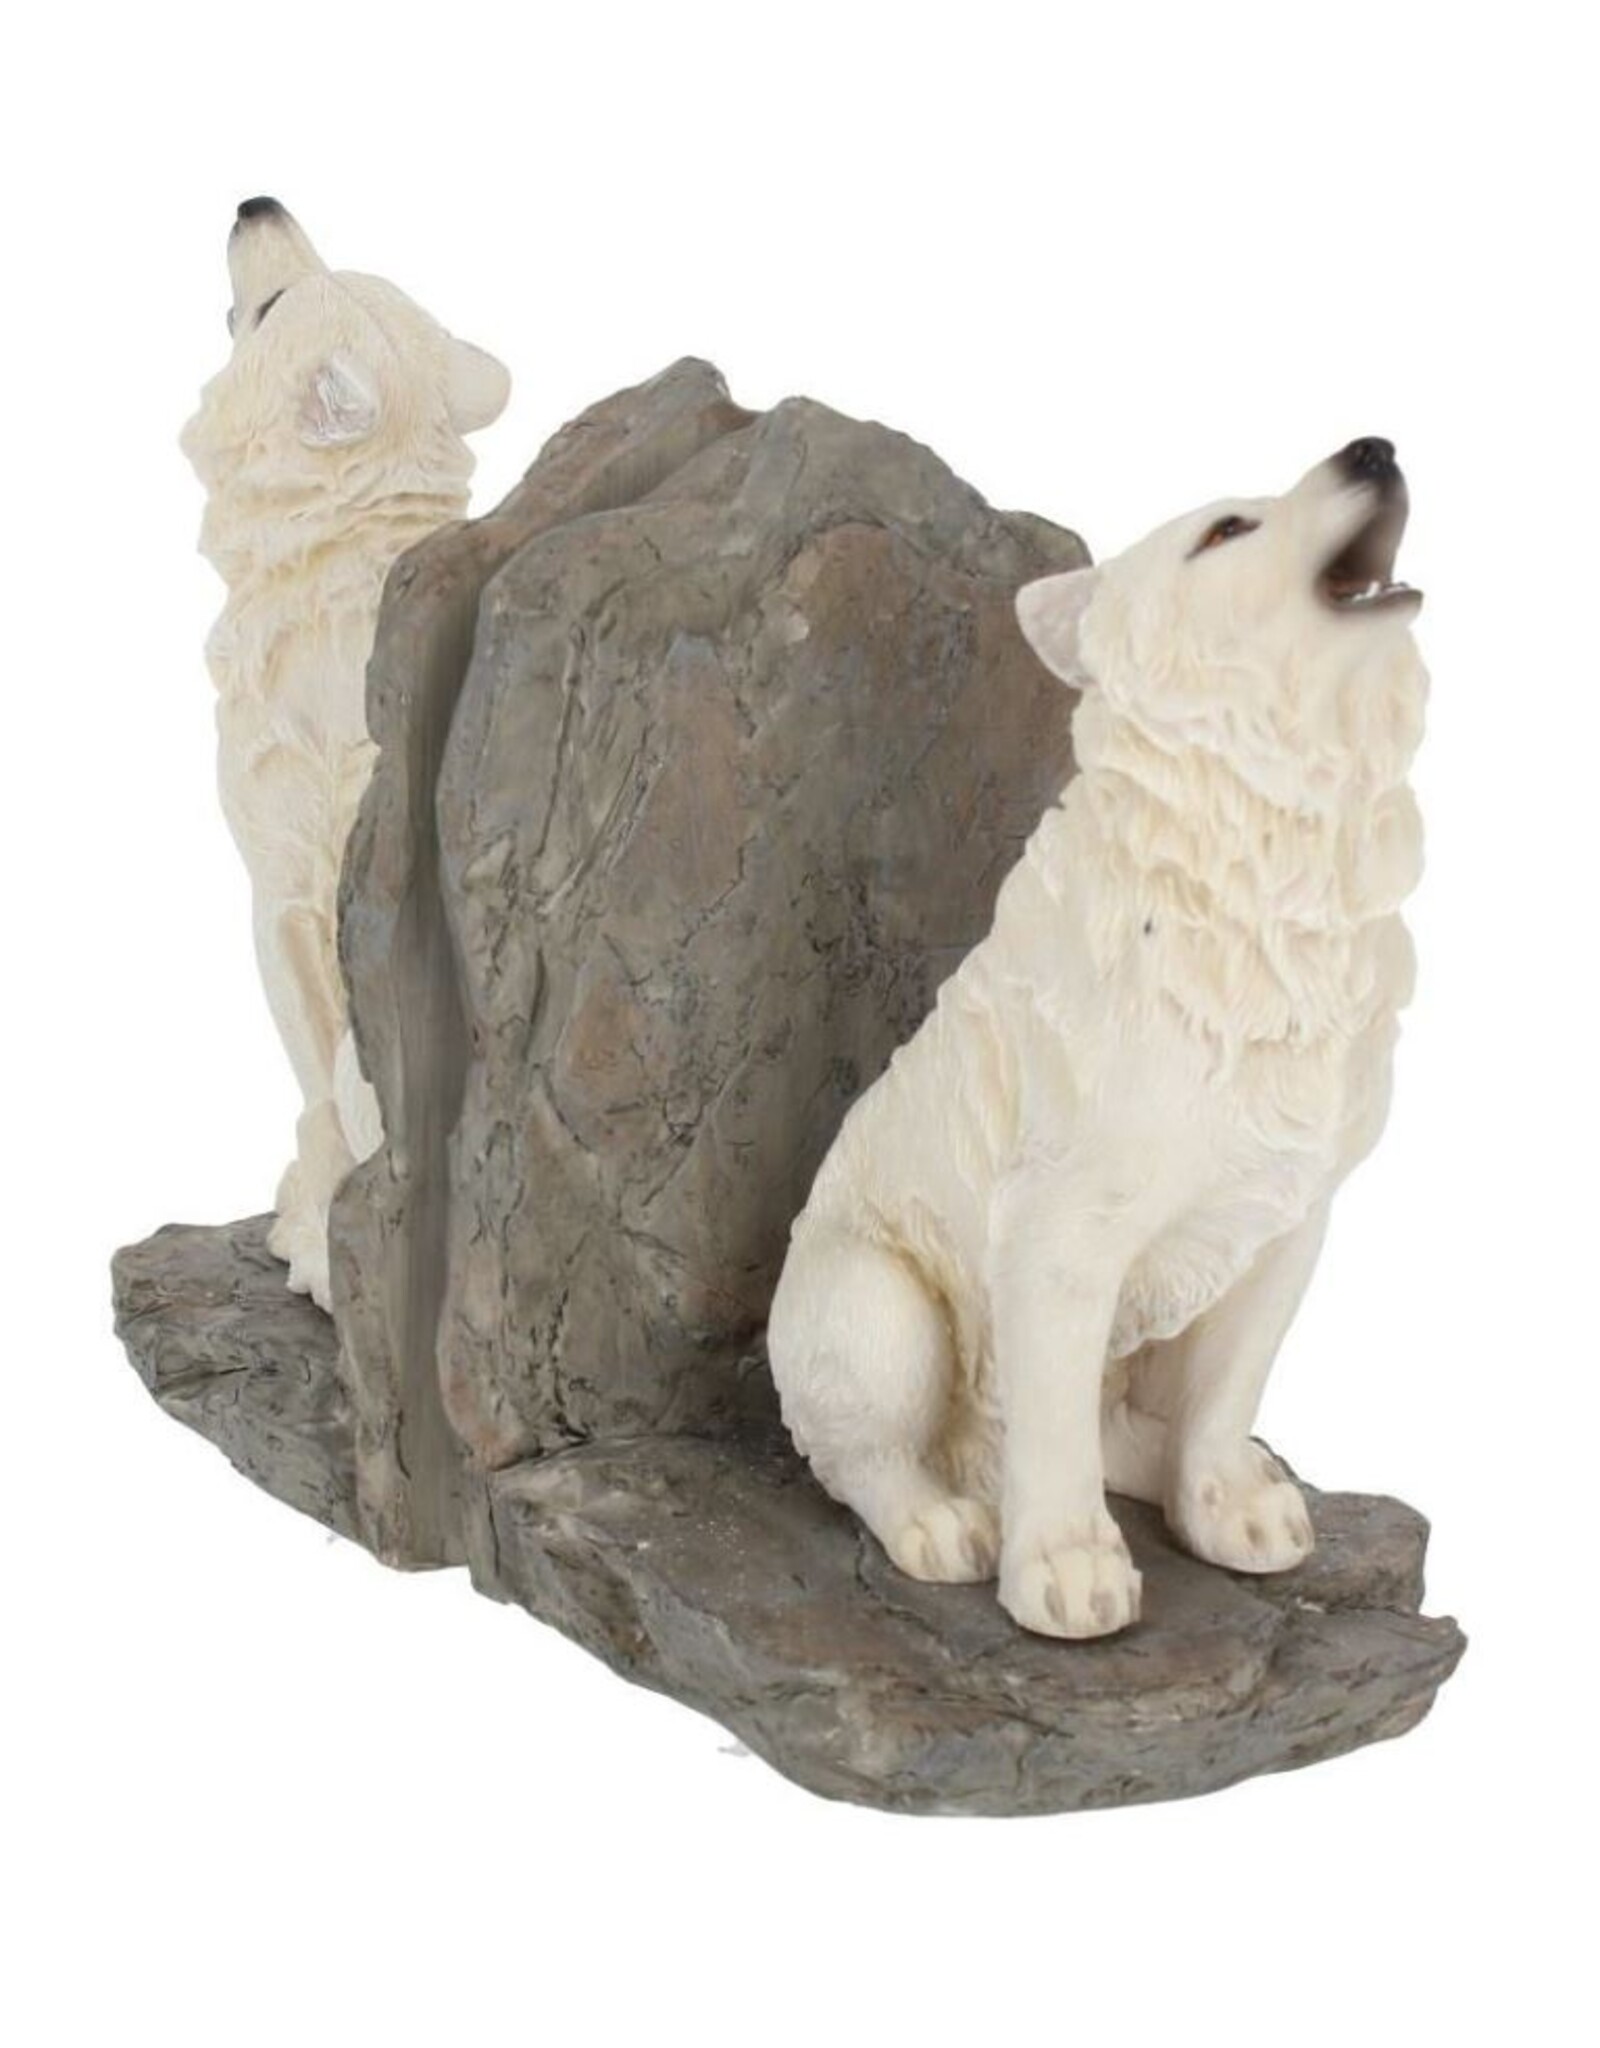 Willow Hall Giftware & Lifestyle - Wardens of the North White Wolf Bookends